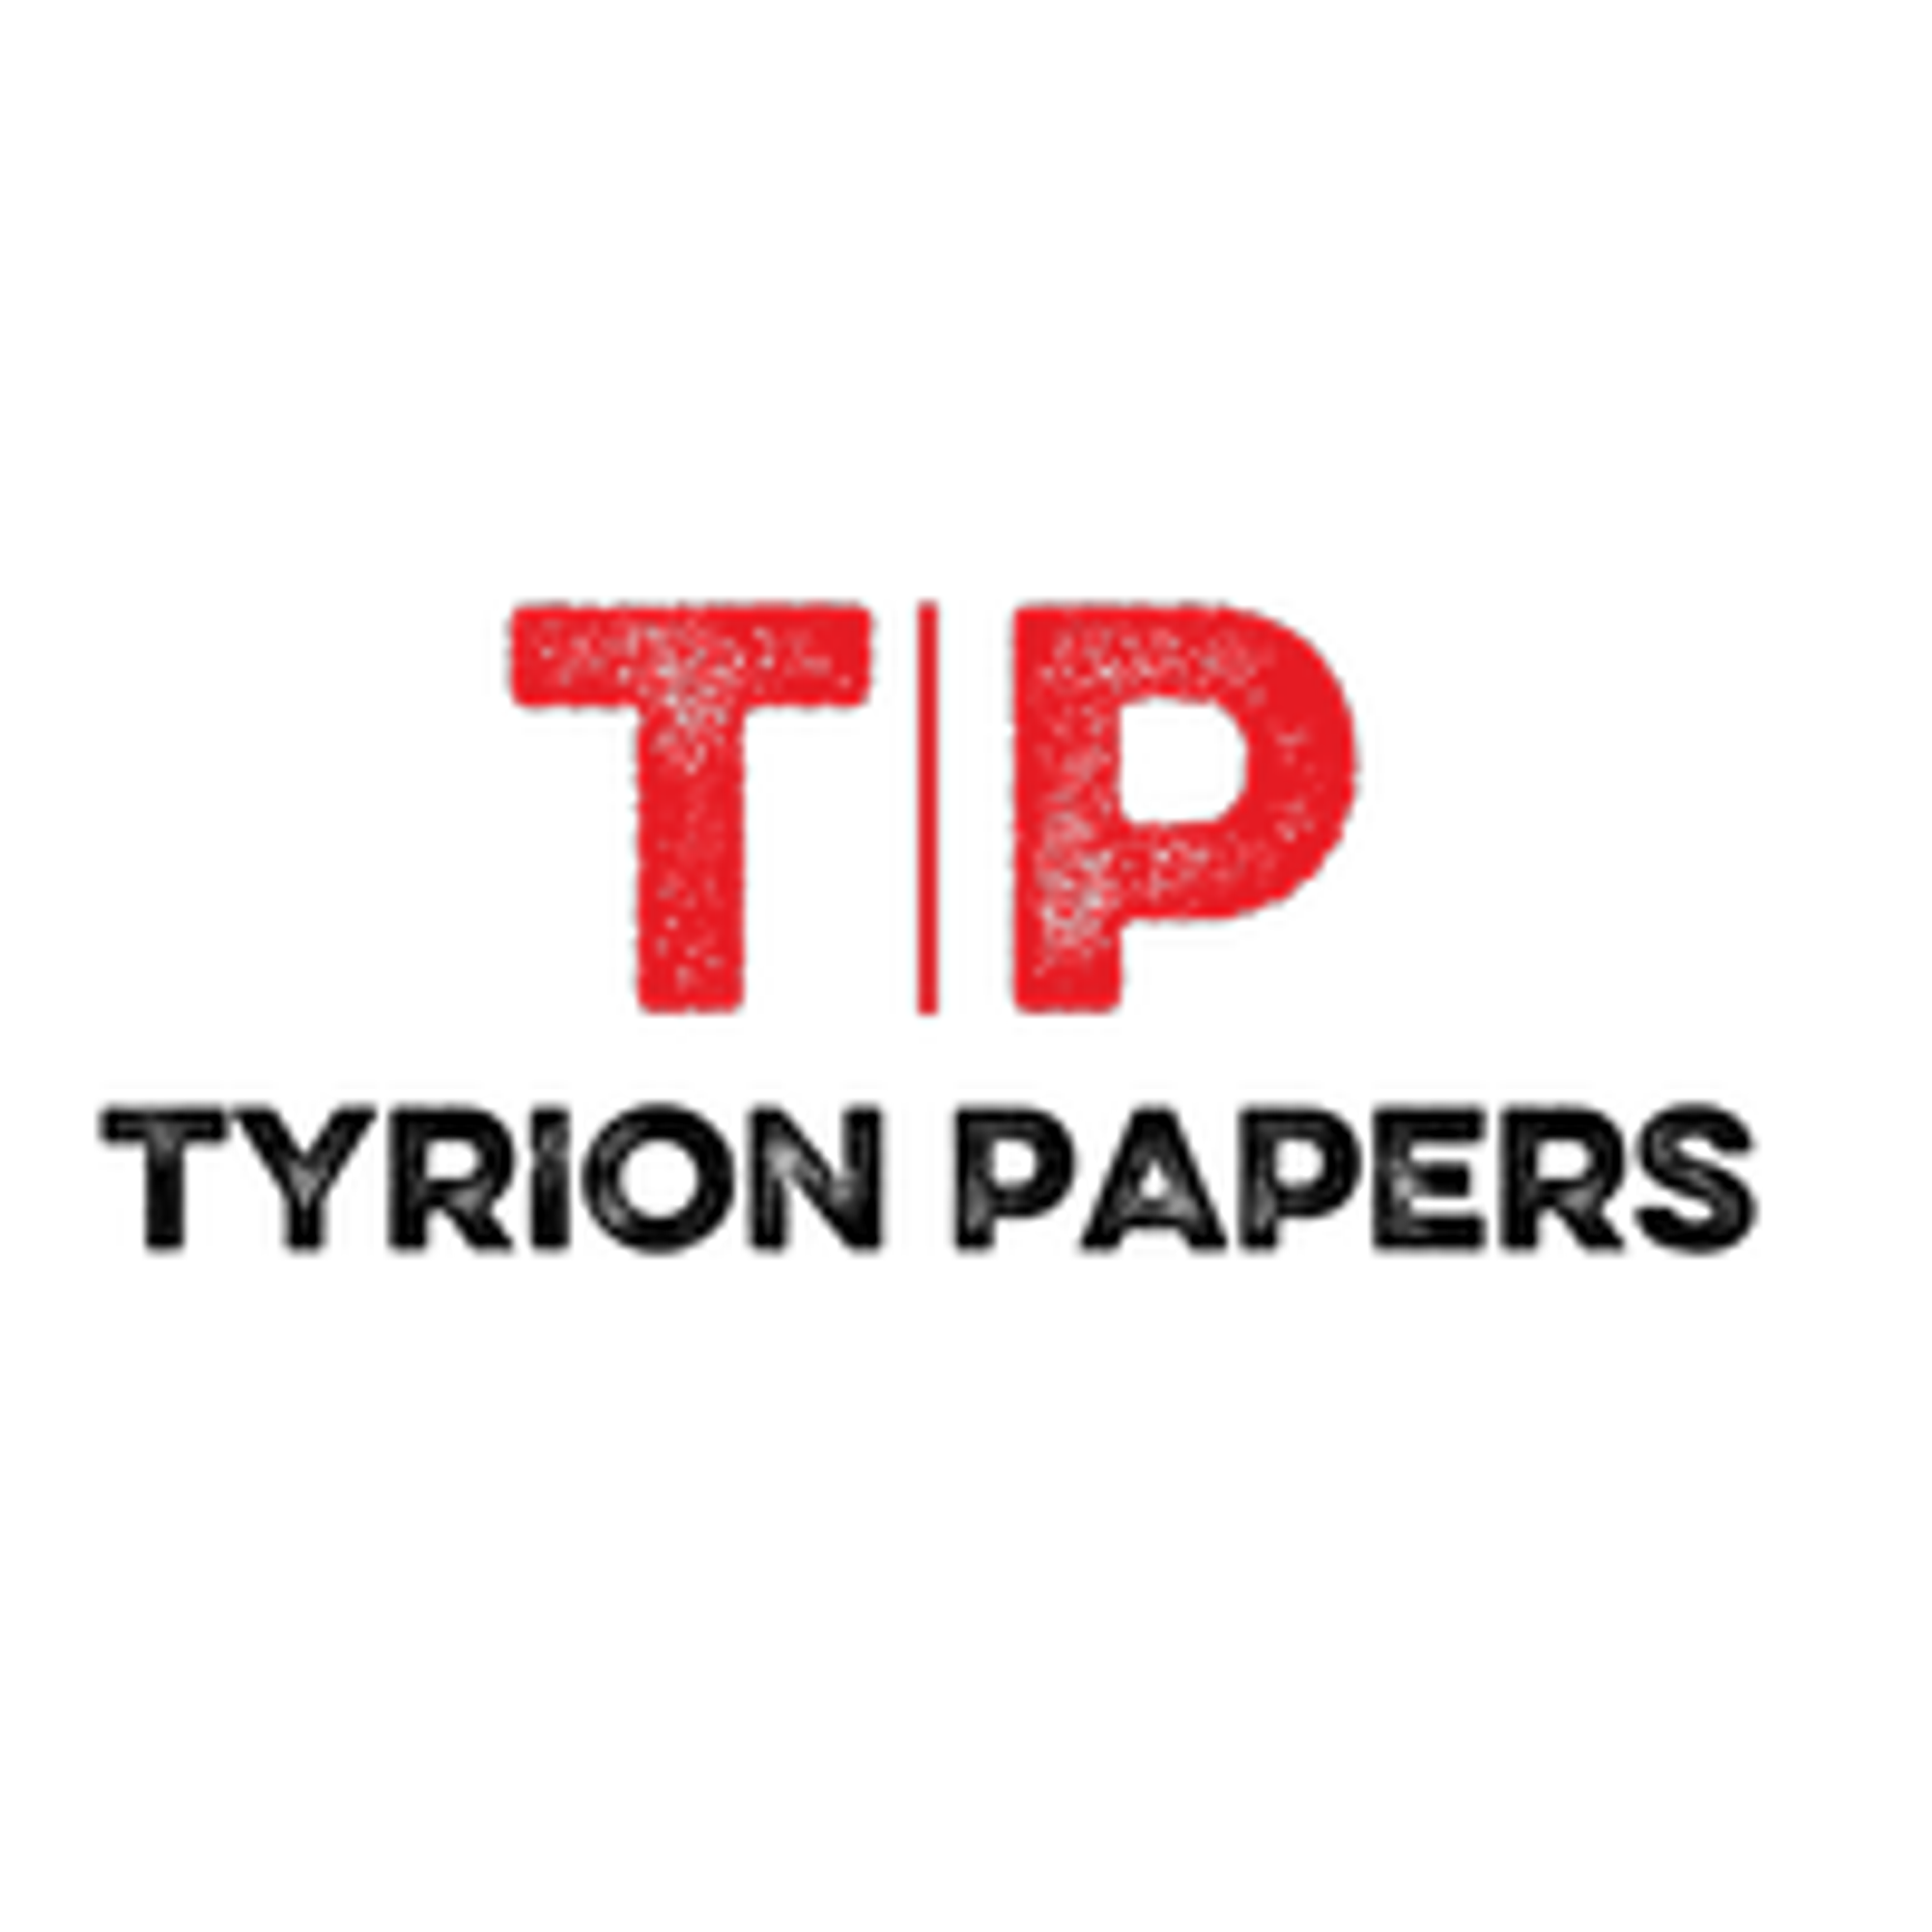 Tyrion Papers Premium 